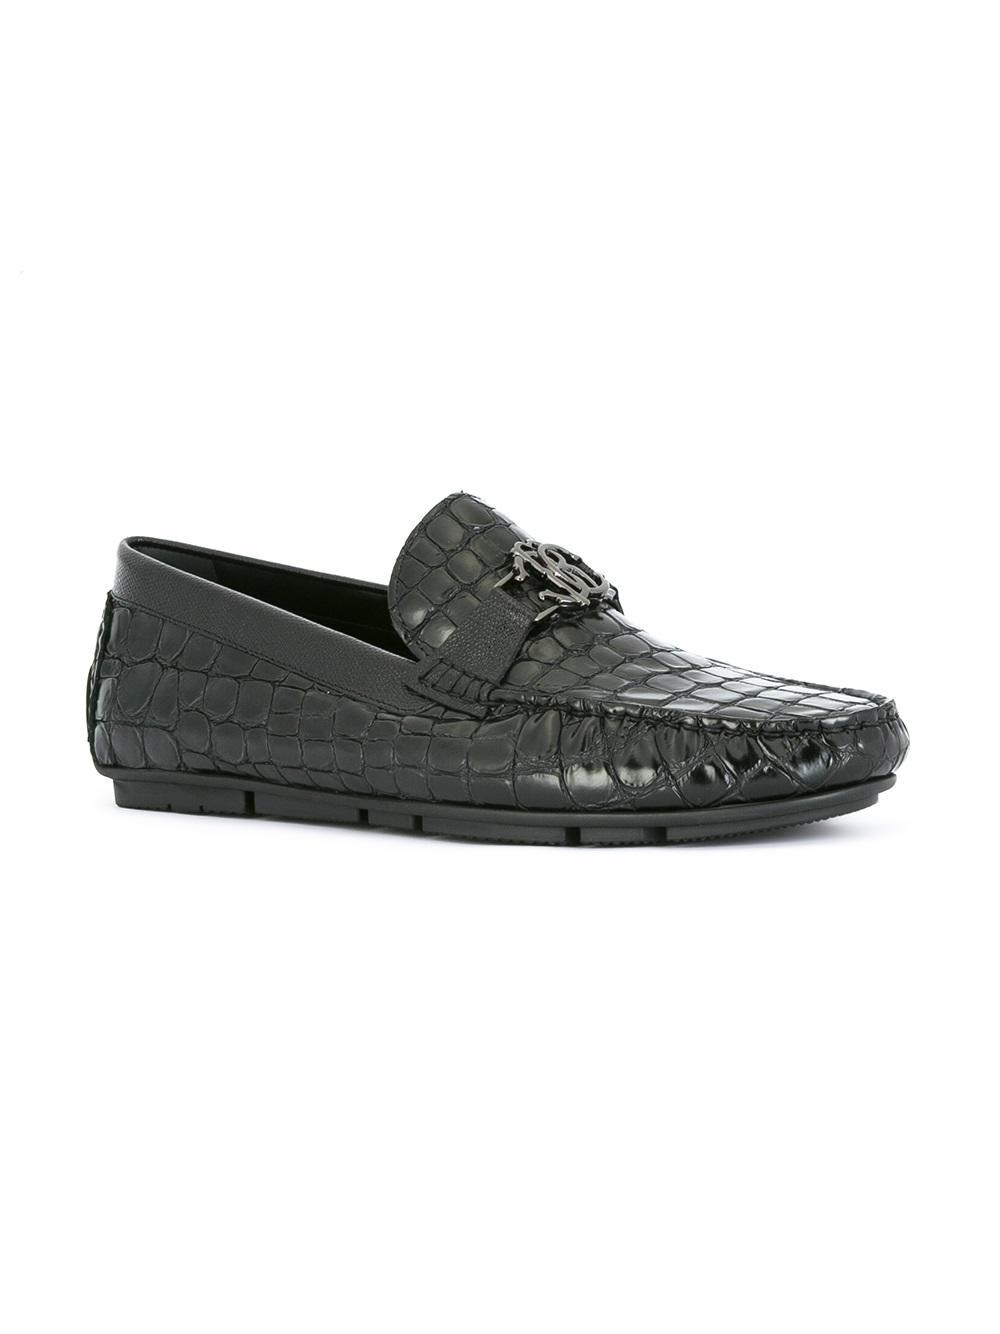 Roberto Cavalli Leather Crocodile Skin Effect Boat Shoes in Black for ...